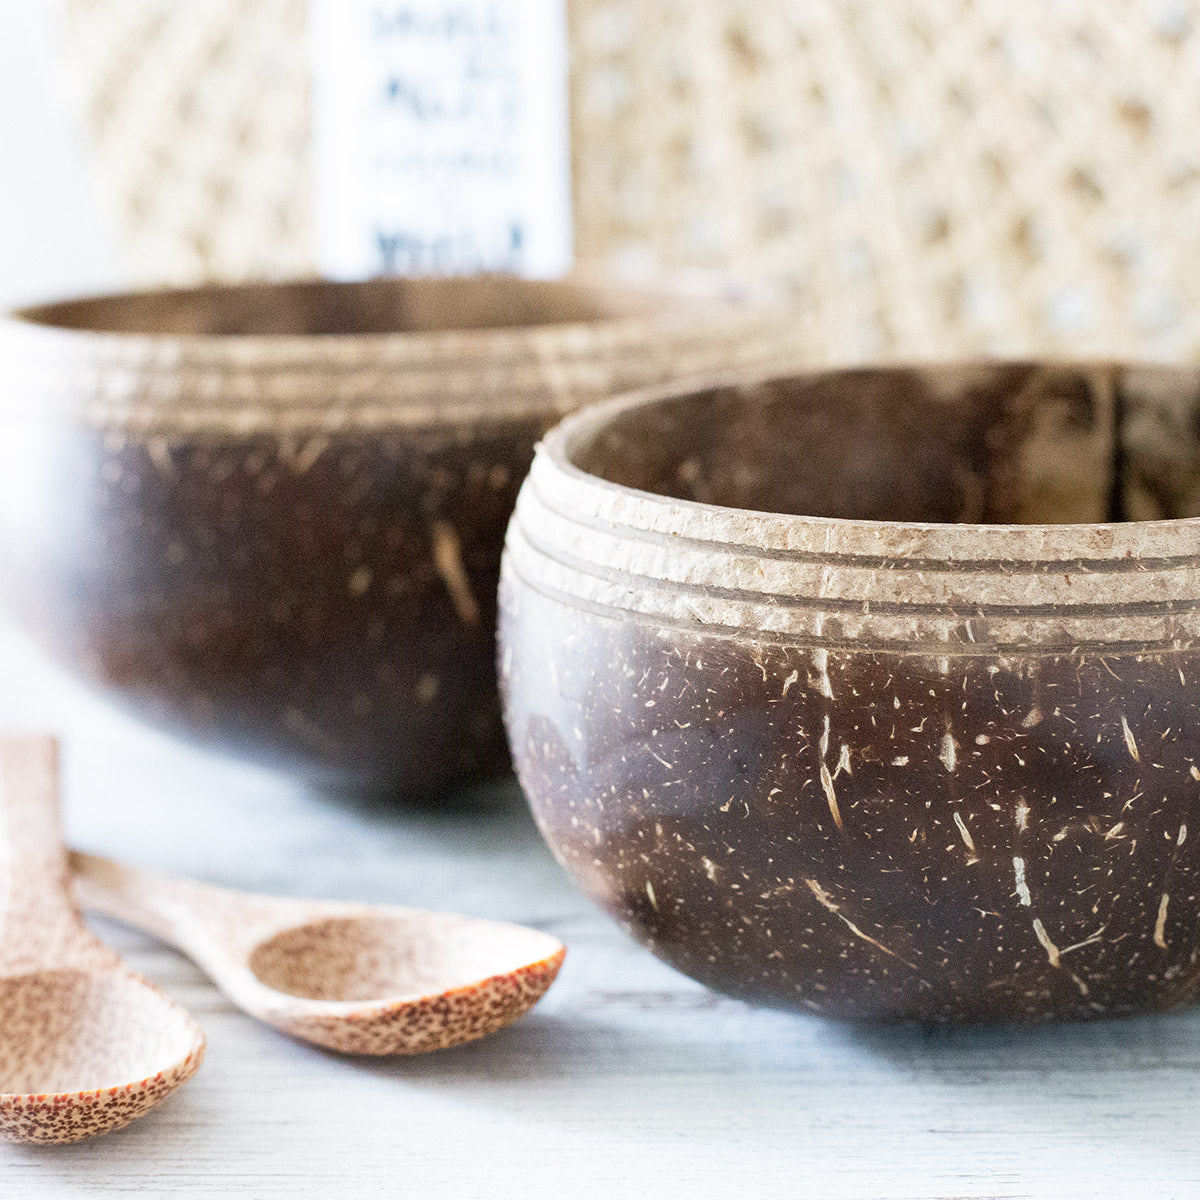 Seagrass Bag and coconut bowls set